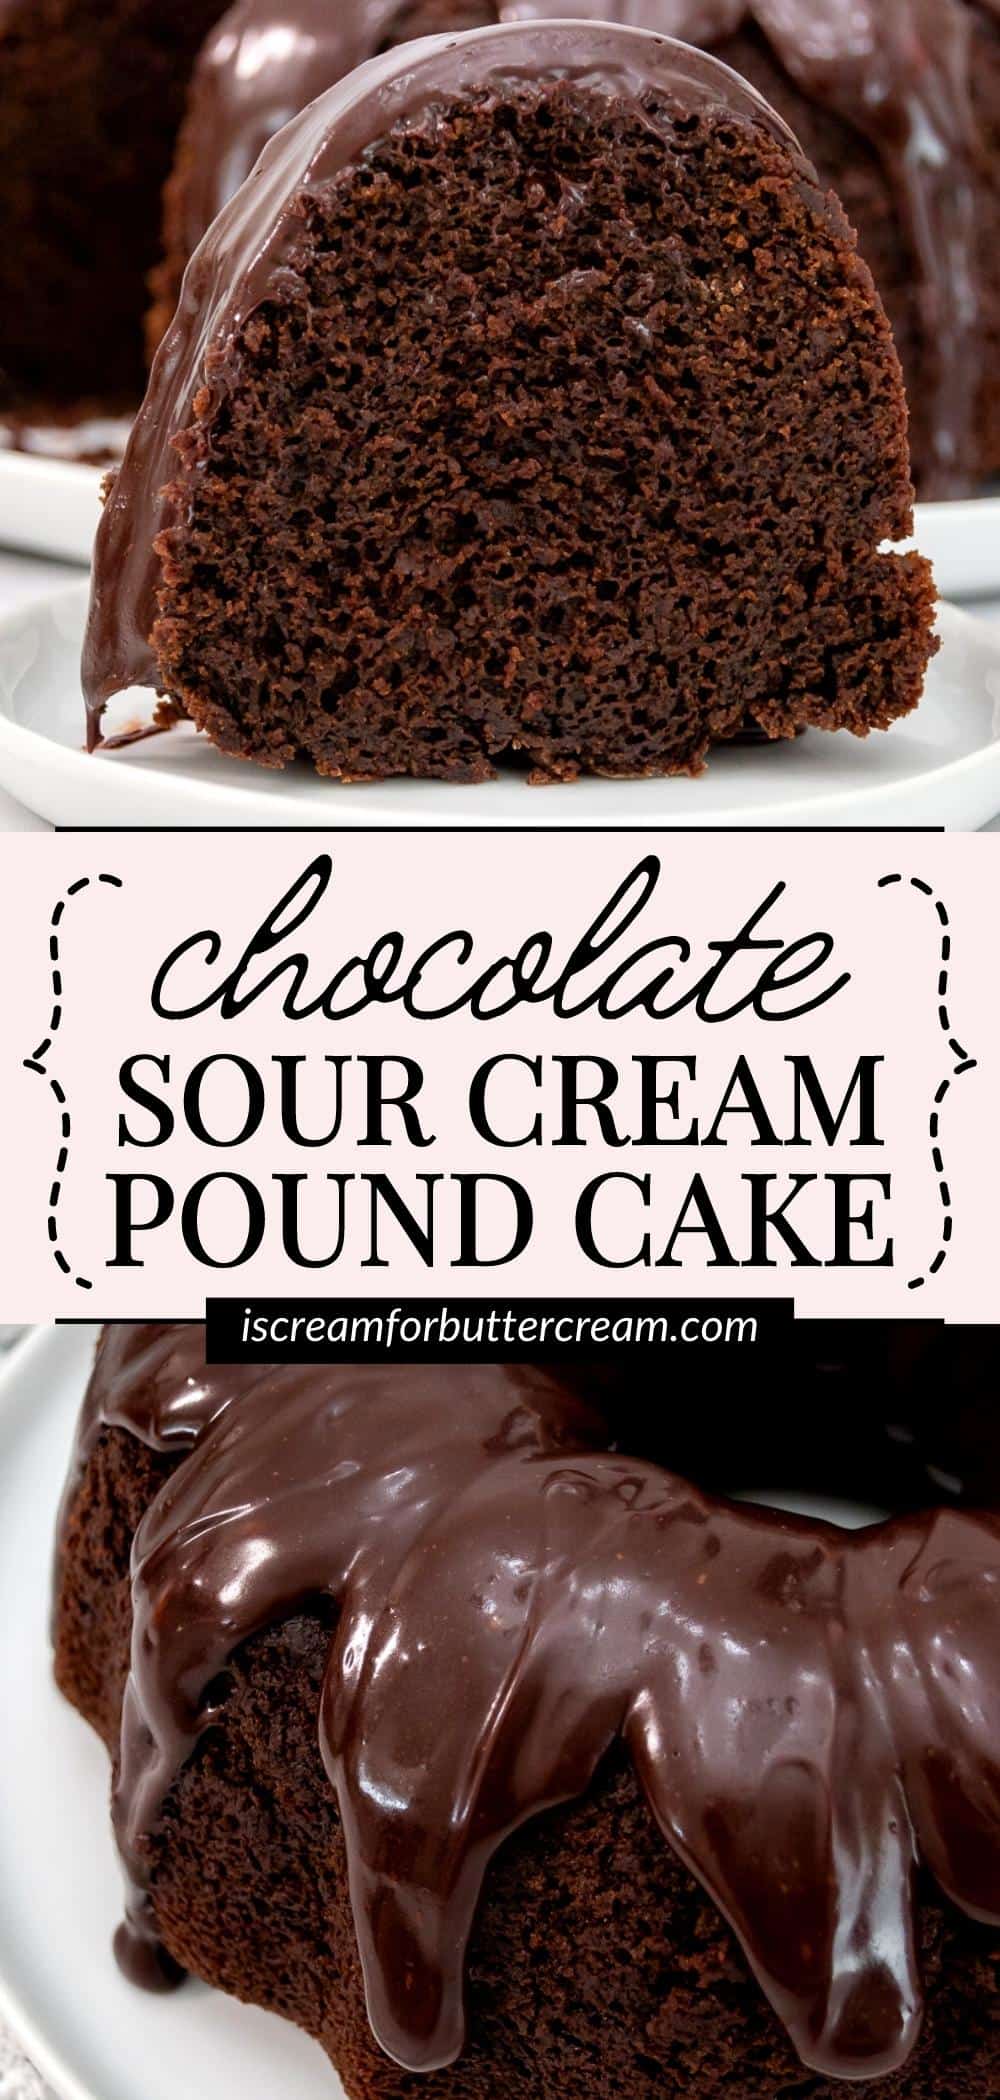 Collage pin graphic with images of chocolate sour cream pound cake with text overlay.